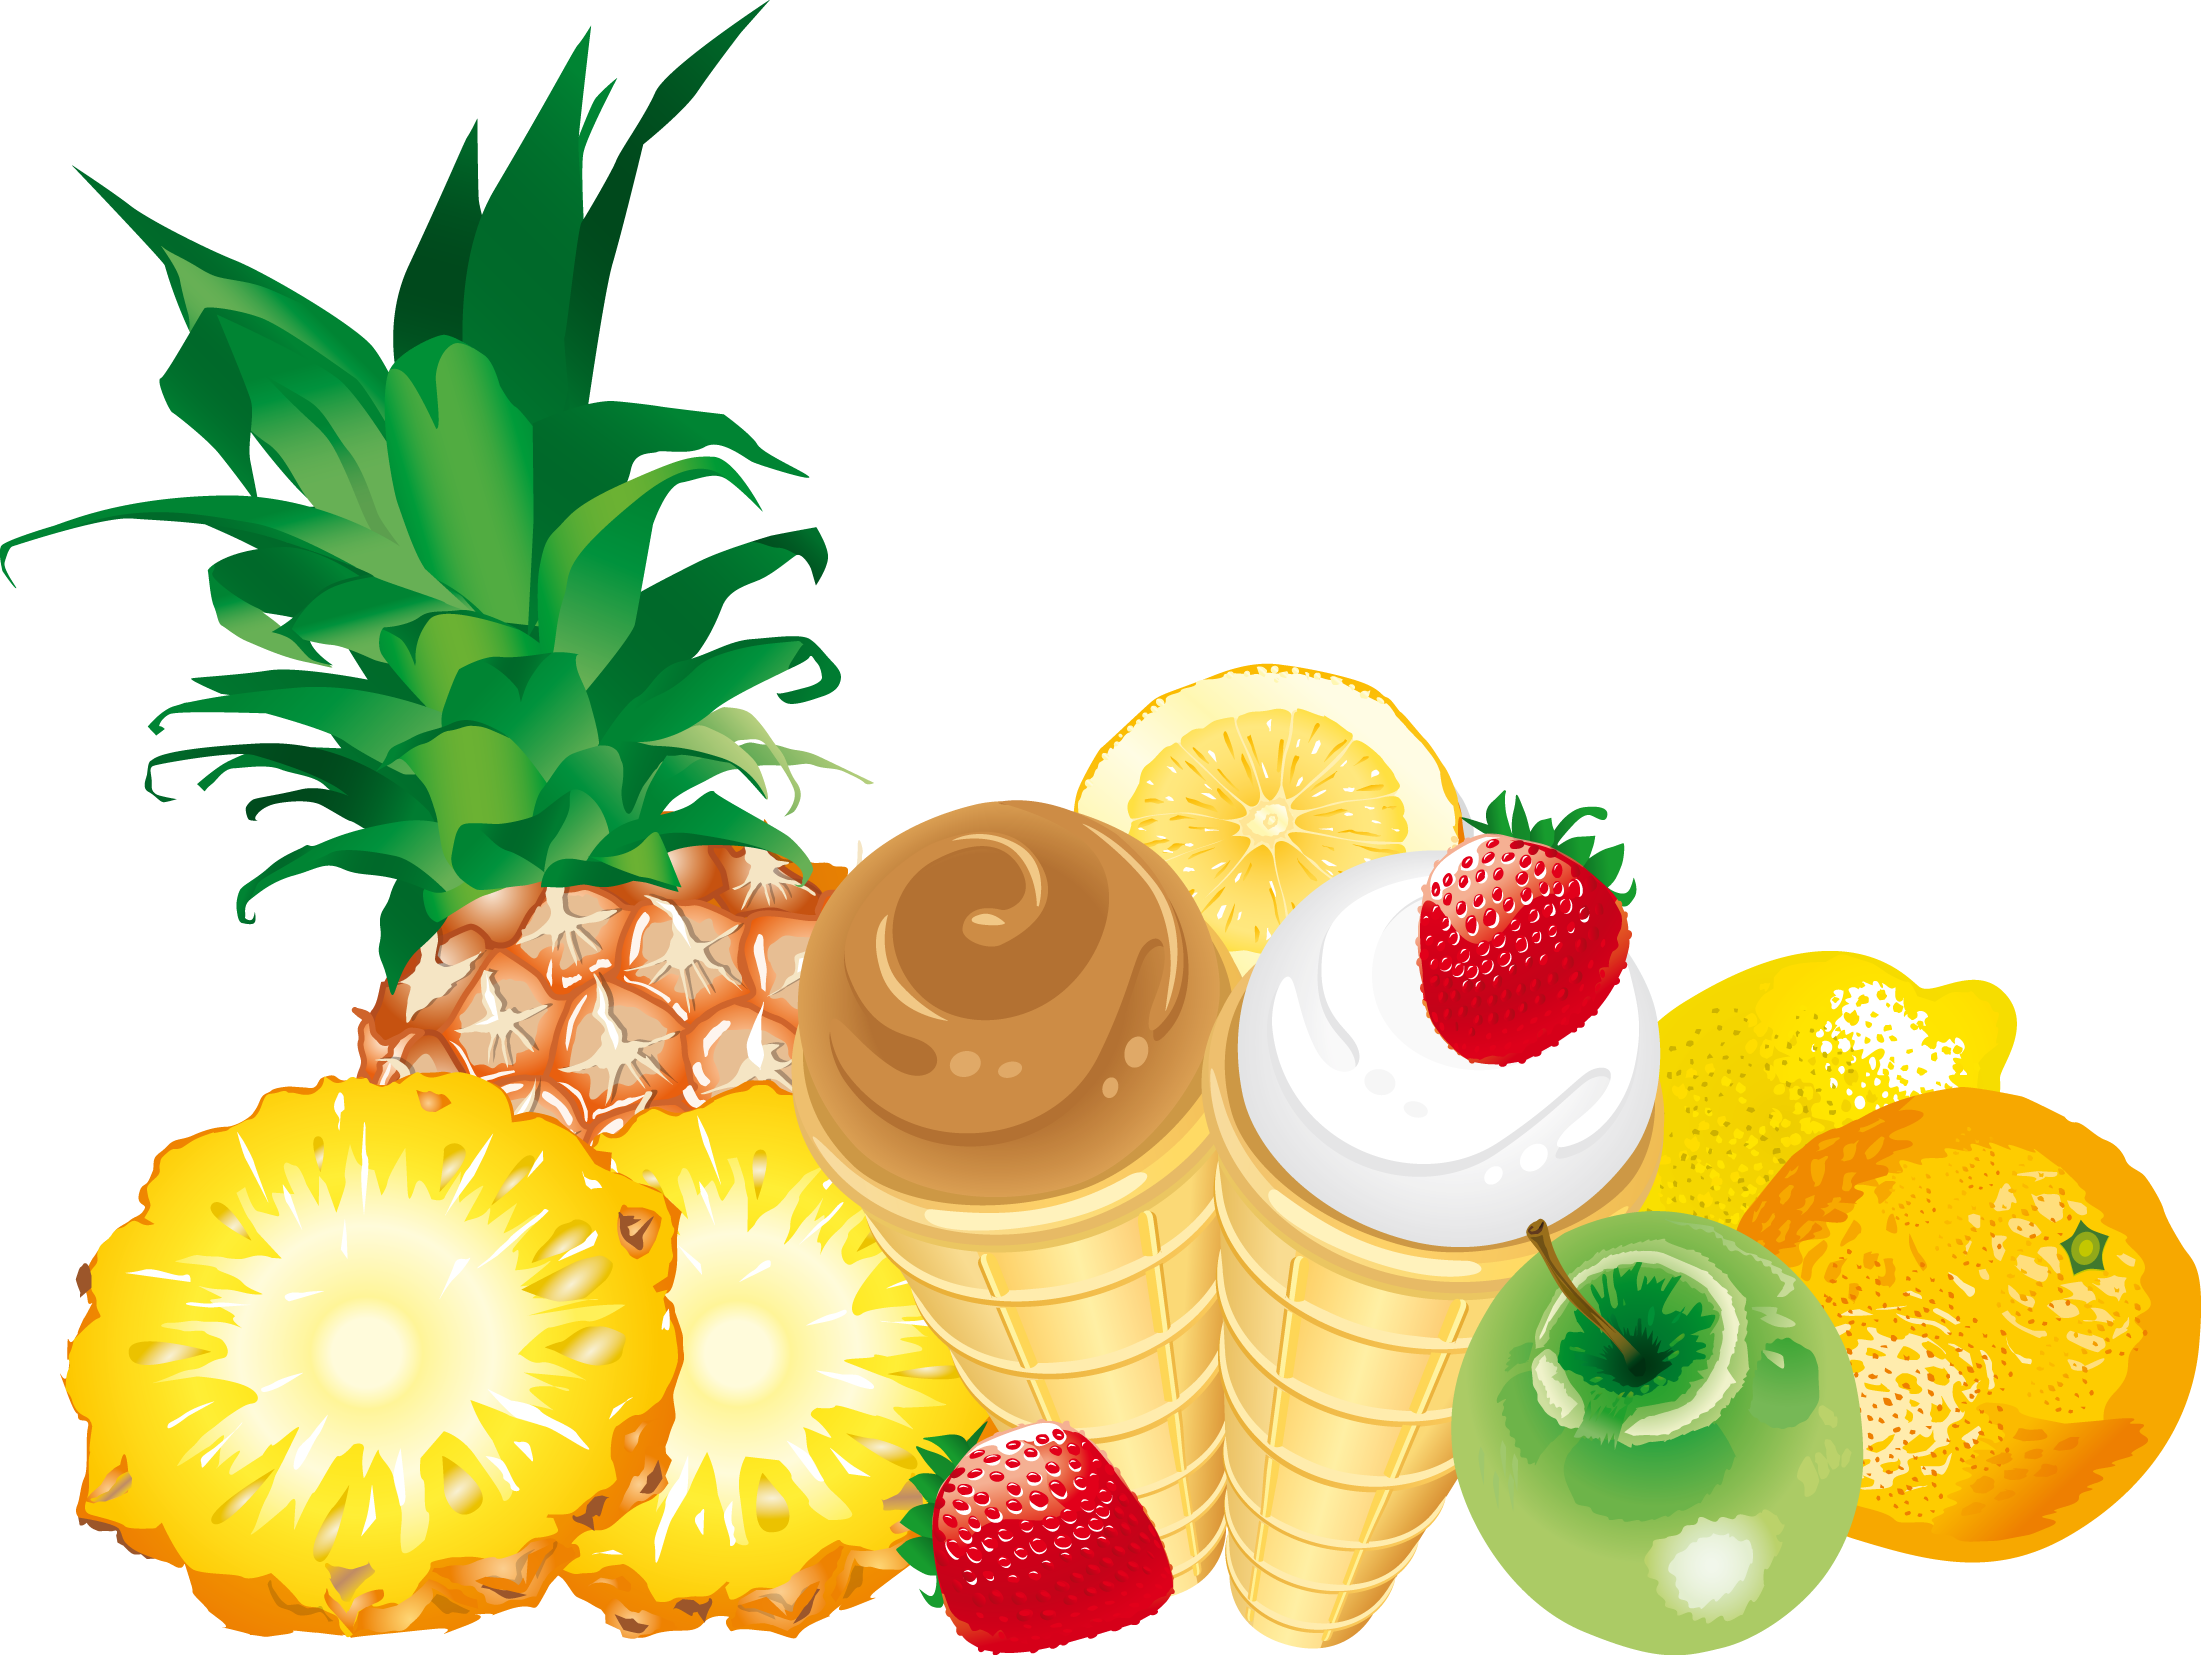 Repack Vectores Gfxcoorpinc collection - Desserts - Fruits And Ice-Cream Convertido.png